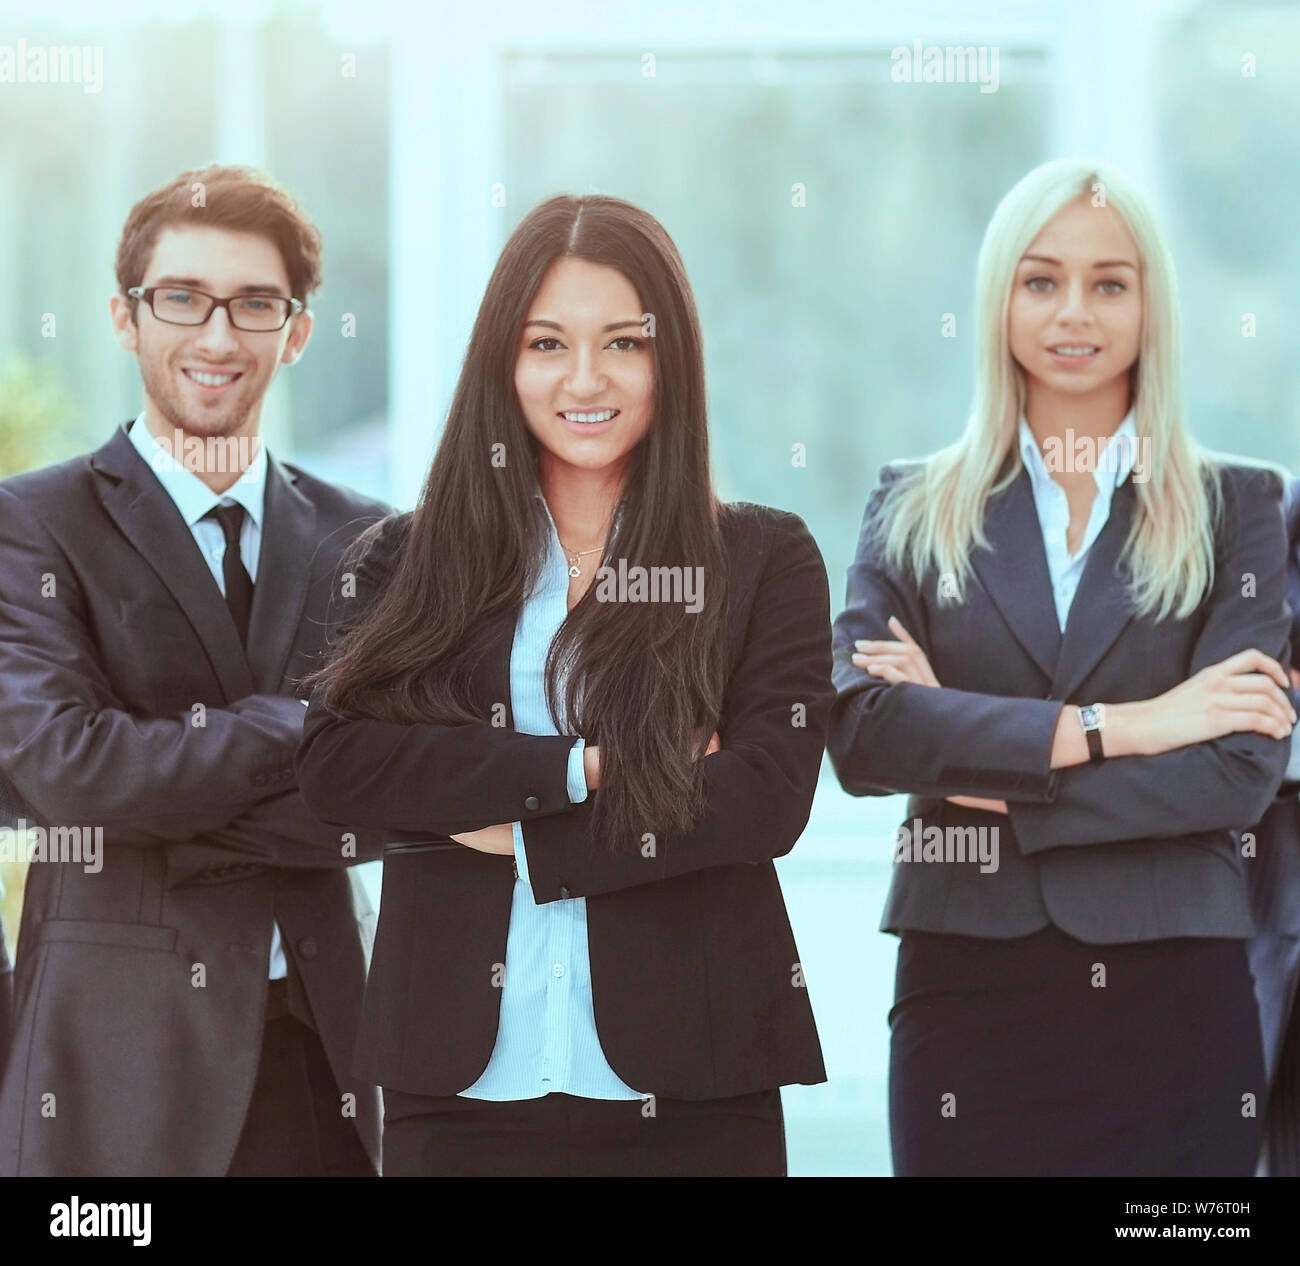 Group portrait of a professional business team looking confidently at camera Stock Photo